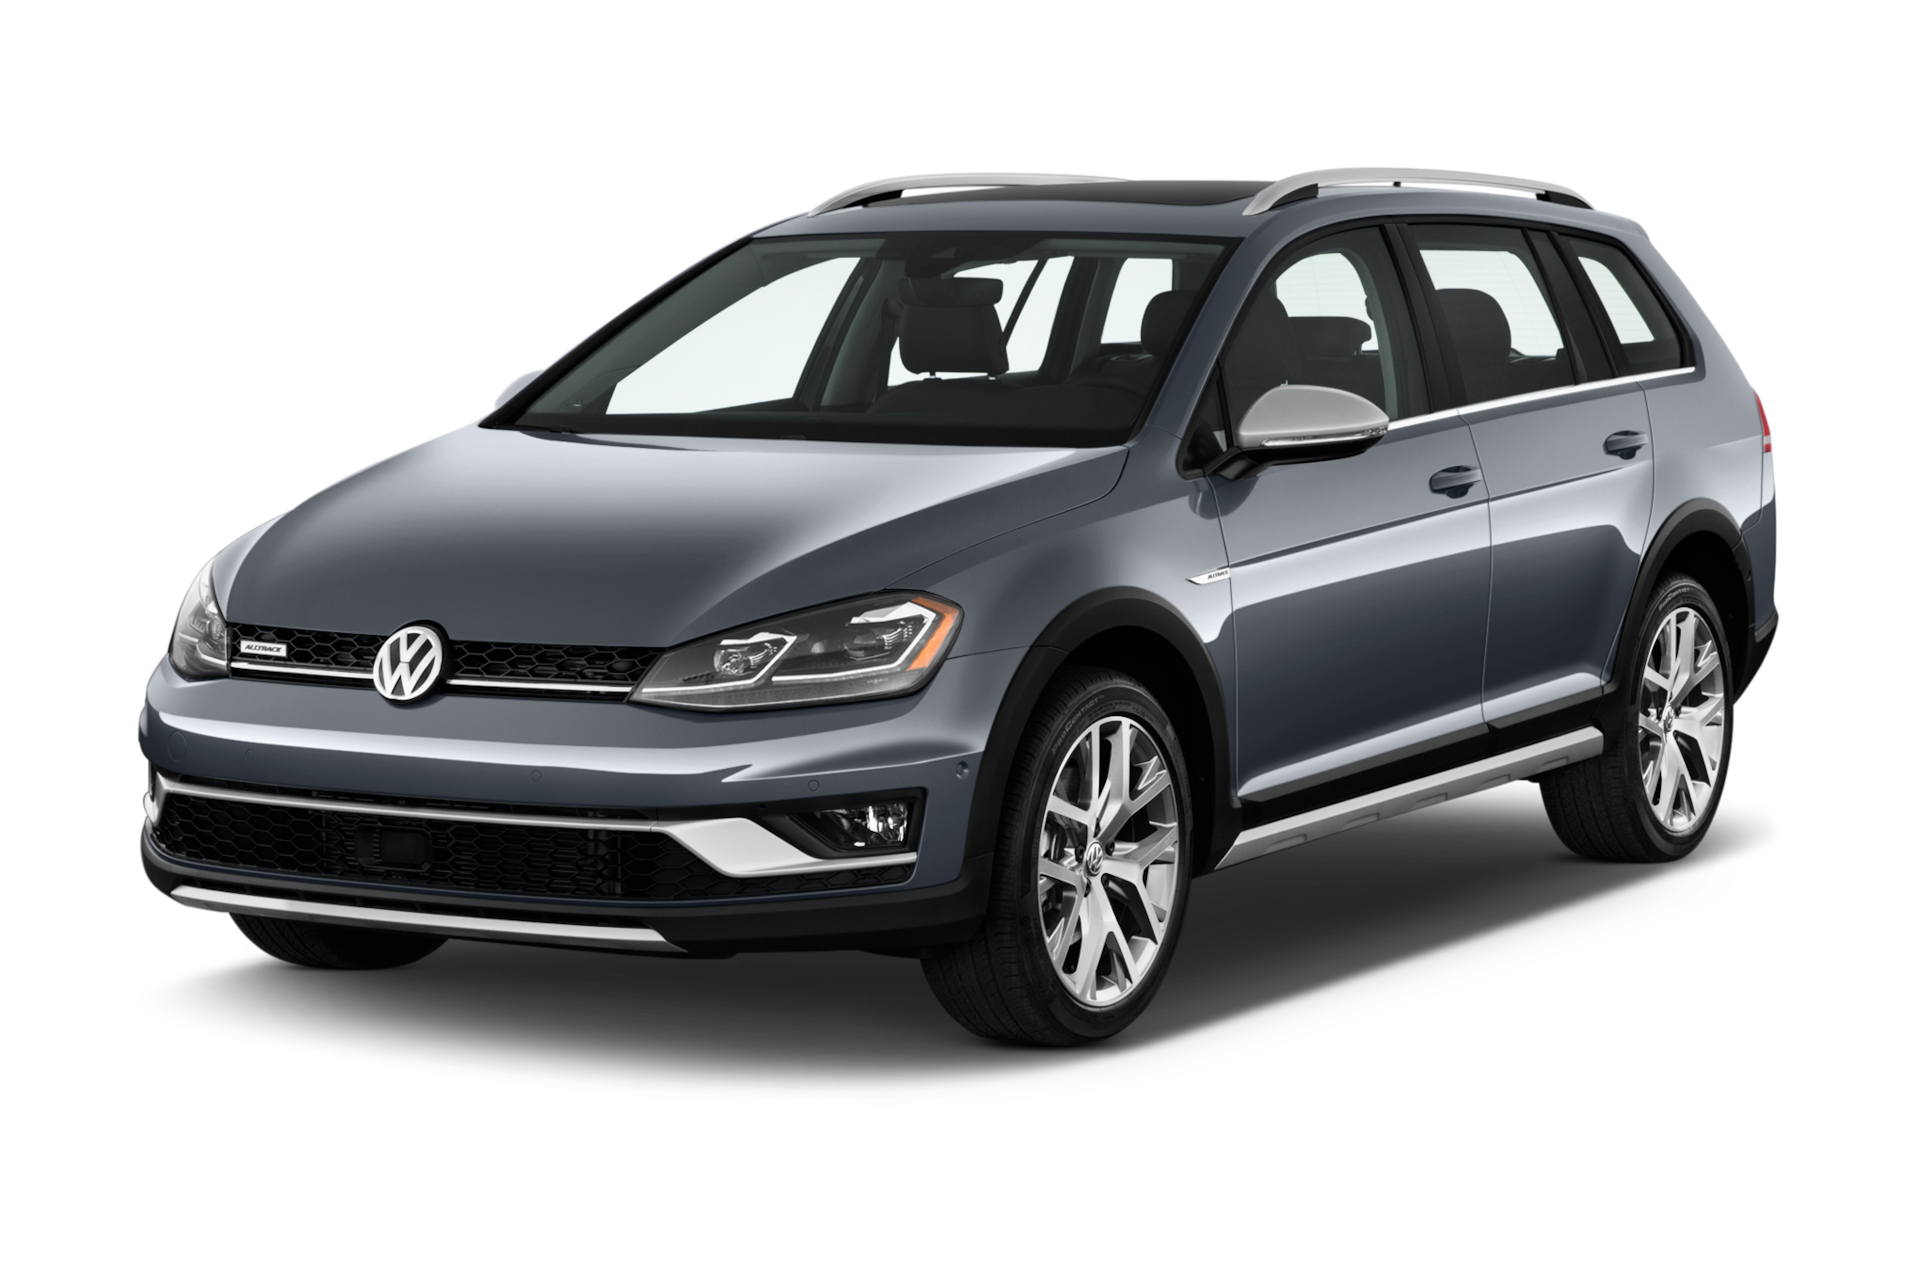 2019 Volkswagen Golf Alltrack Prices, Reviews, and Photos - MotorTrend